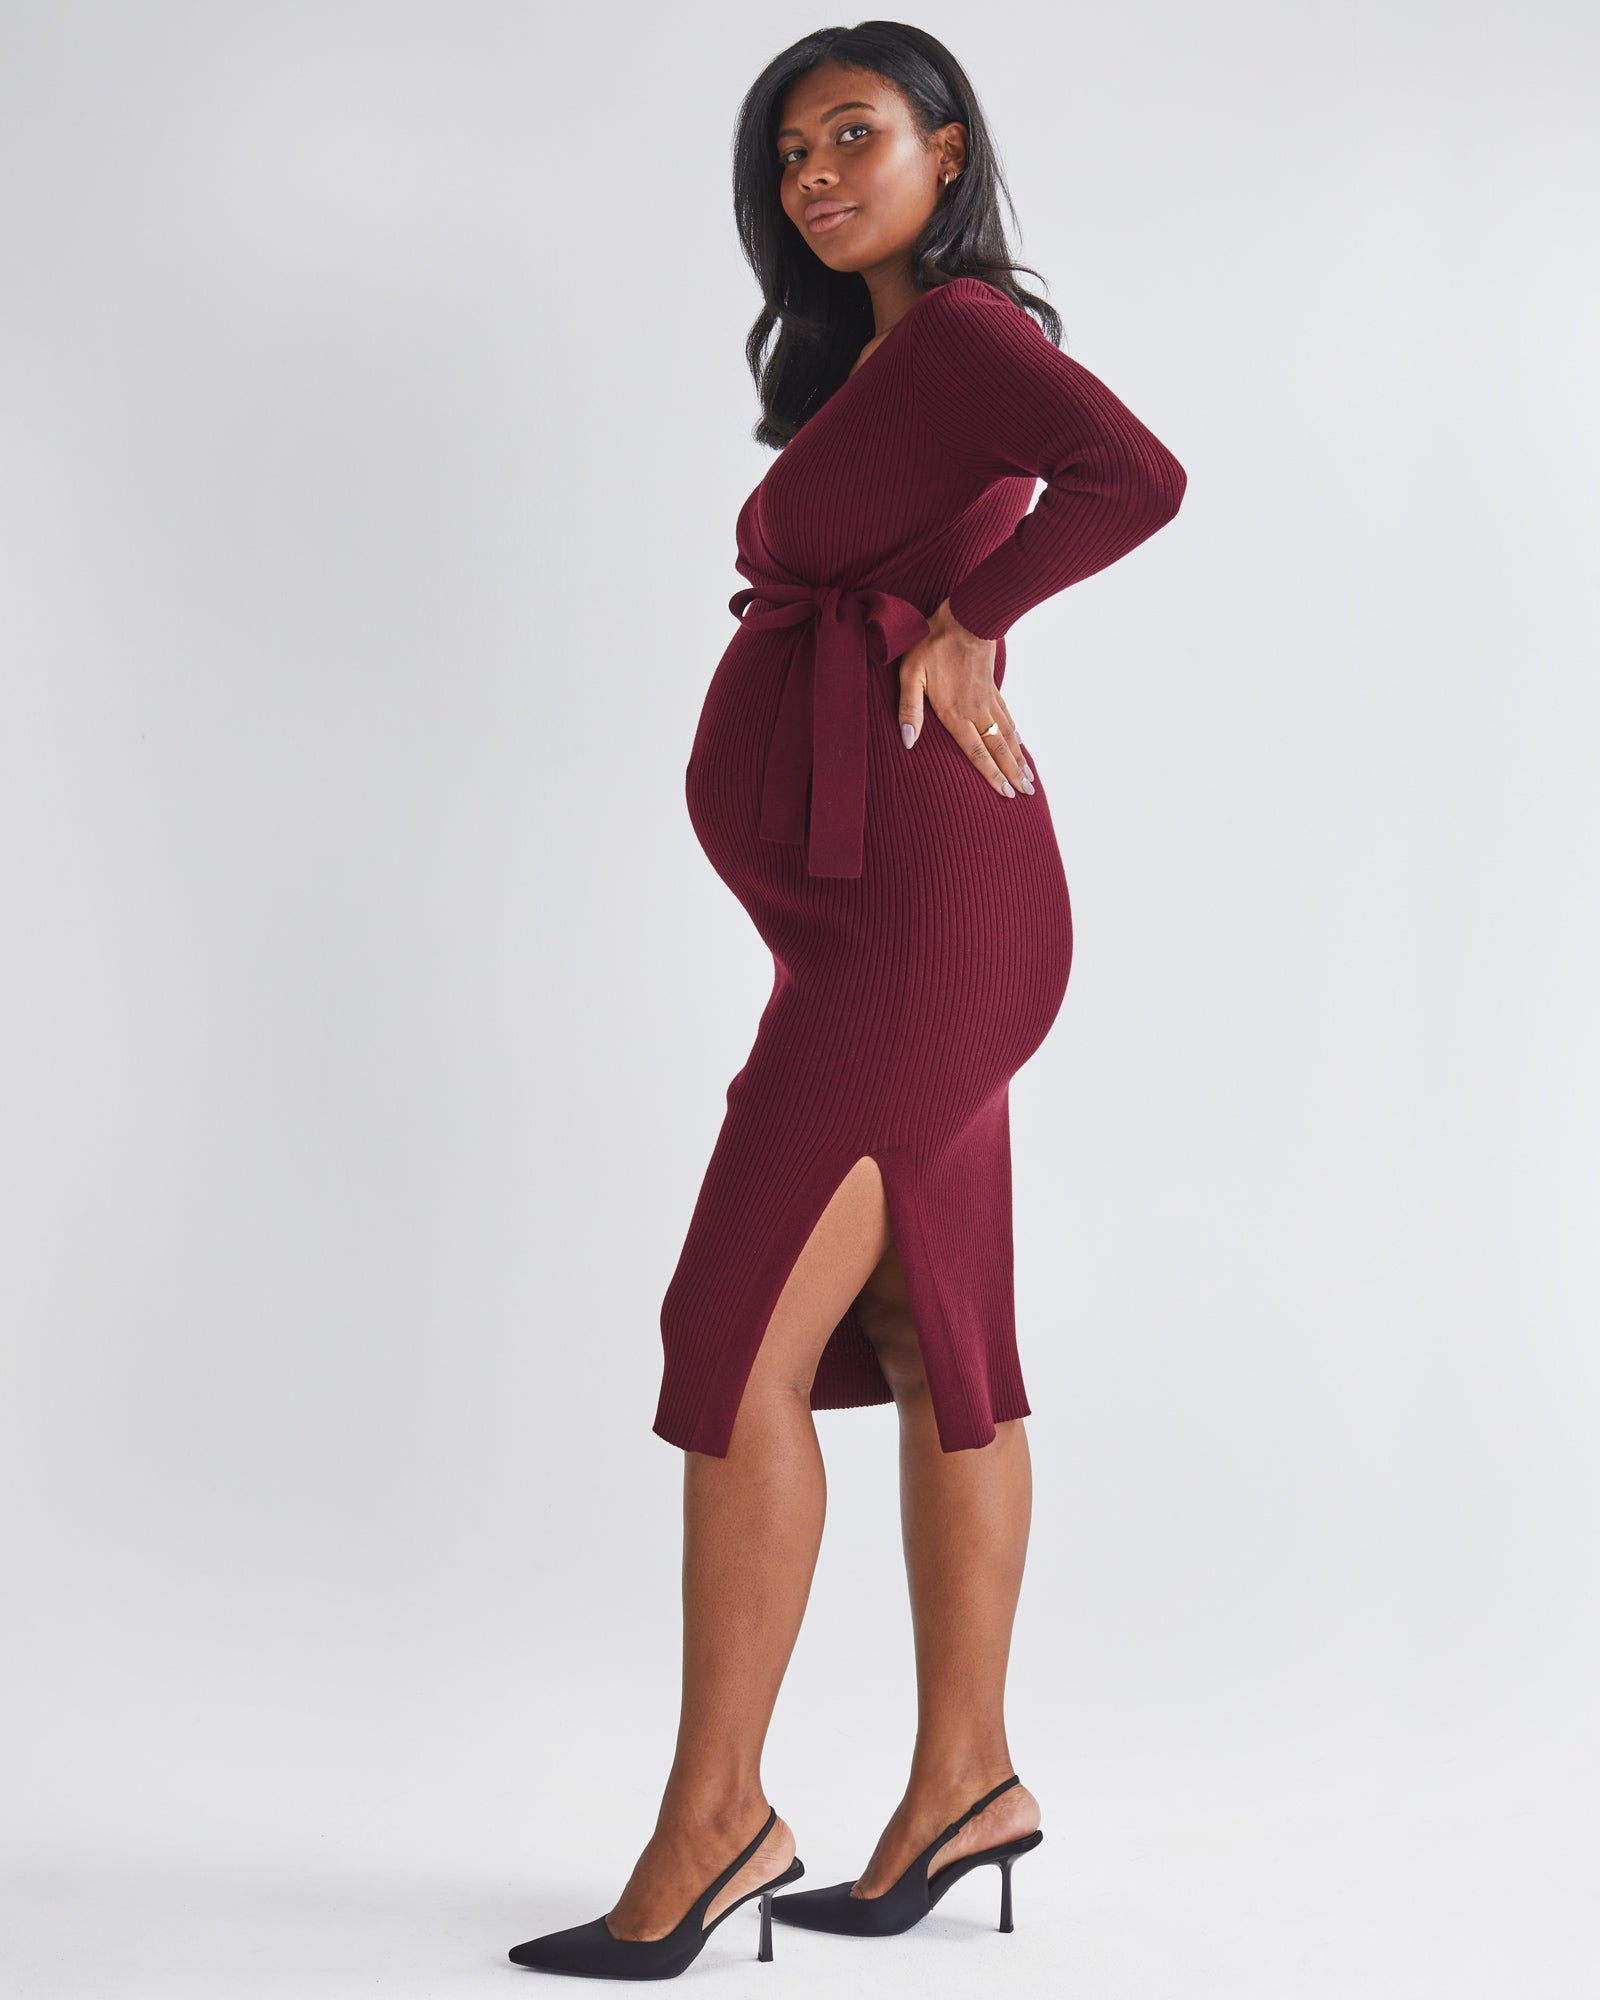 Angel Maternity Clothing - Little Miracles Maternity Wear